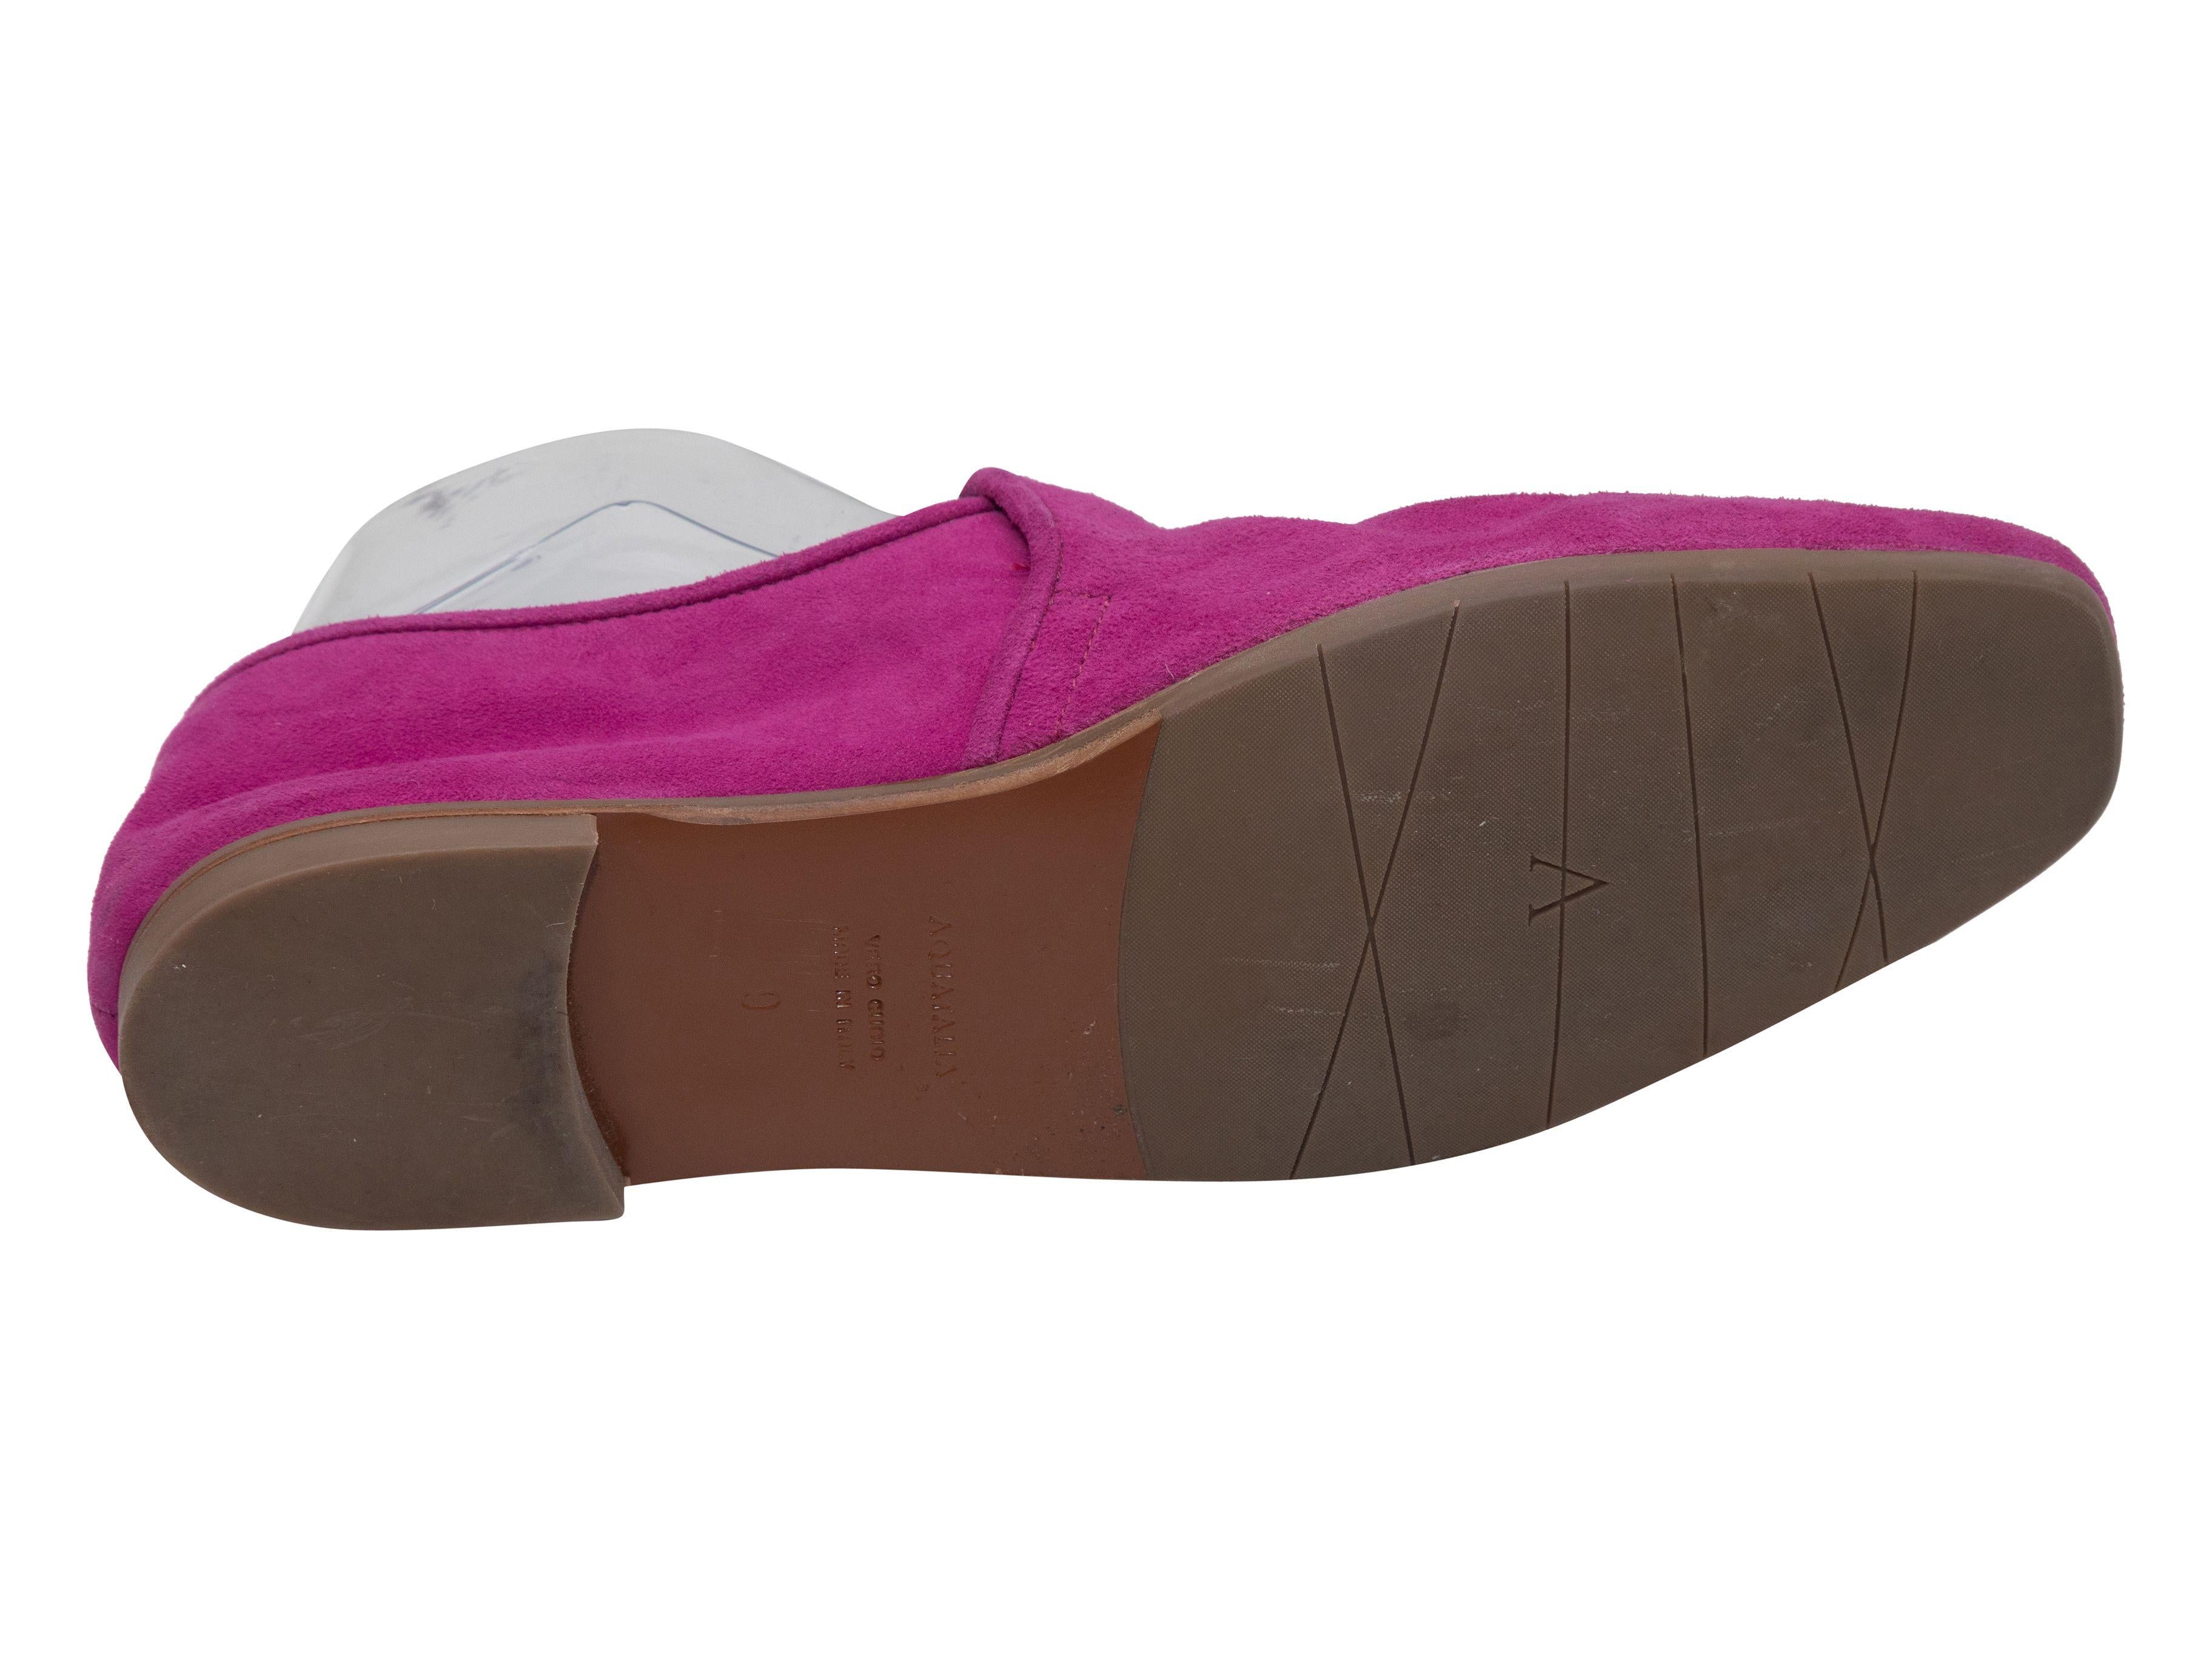 Product Details: Magenta soft suede loafers by Aquatalia. 0.5